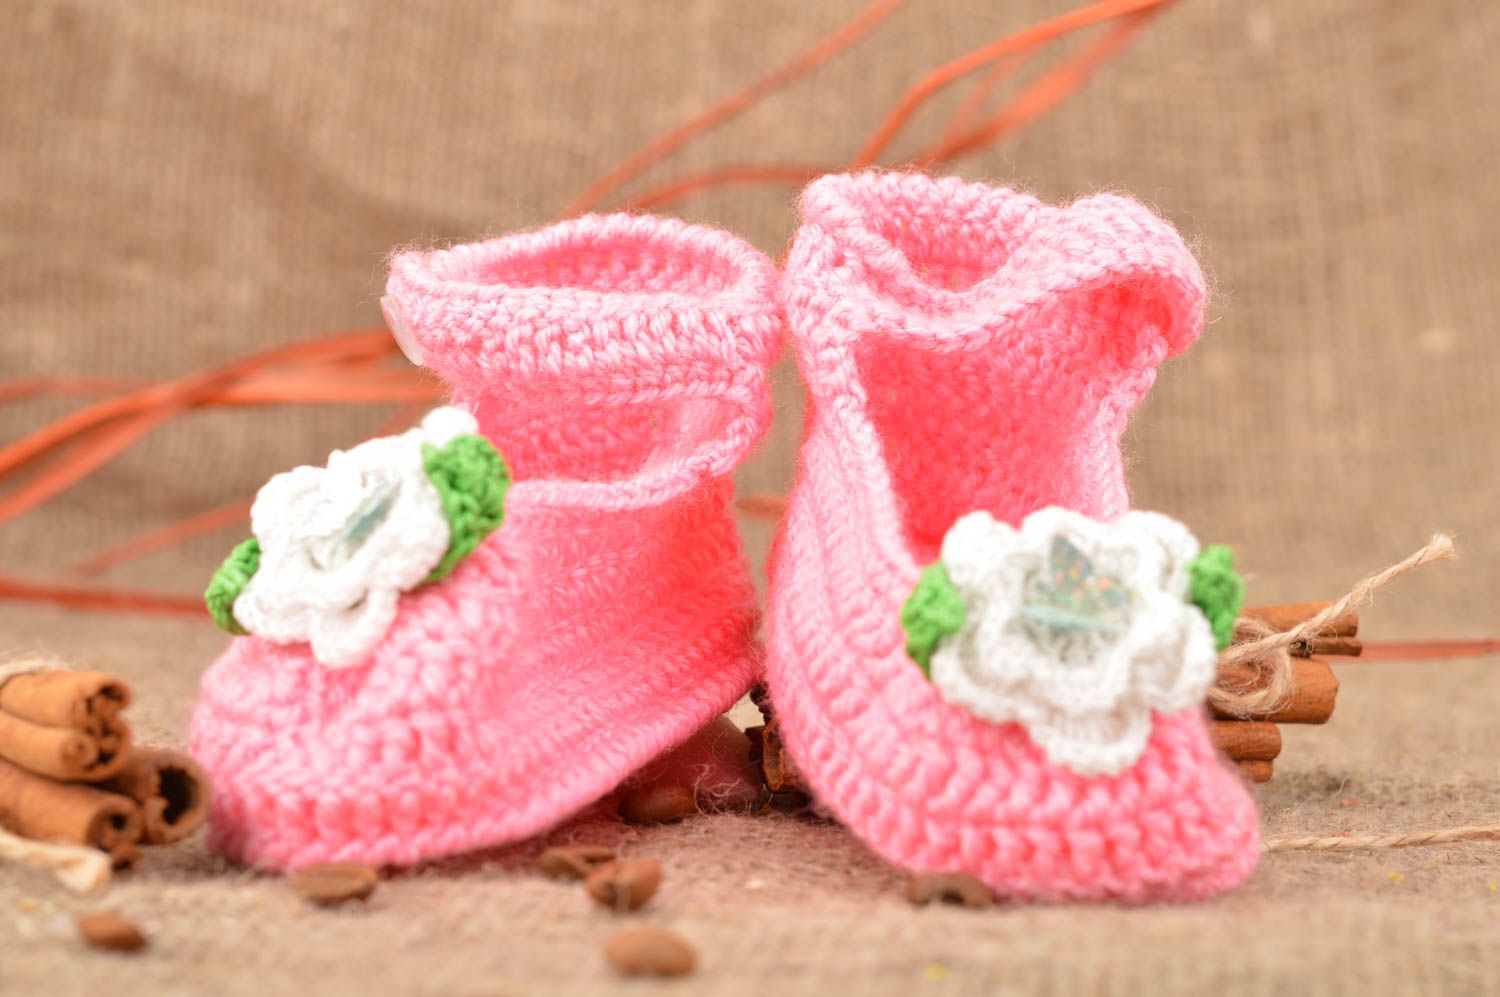 Crocheted designer handmade pink baby bootees made of cotton for girls photo 1